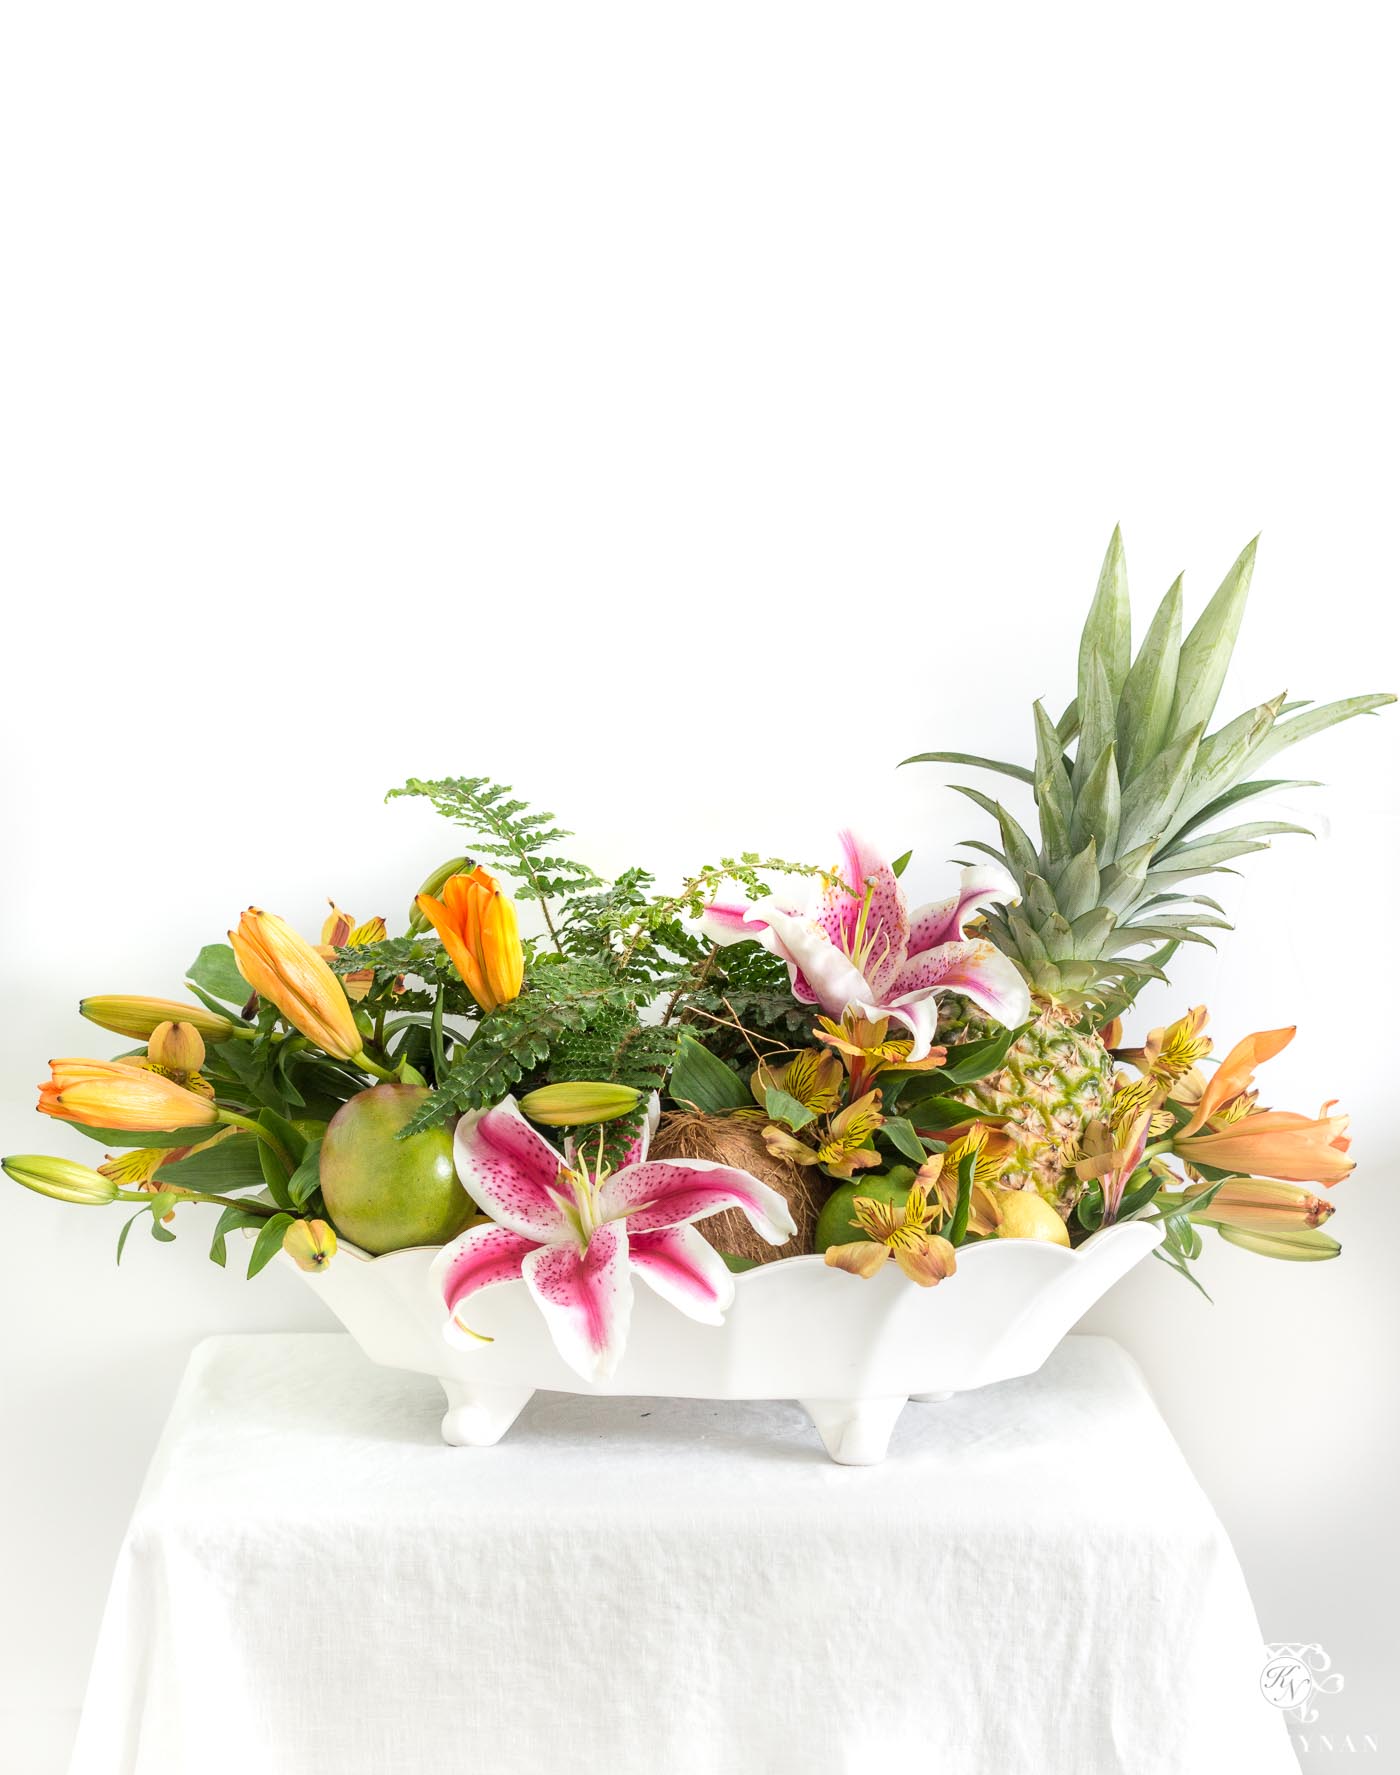 Six Ideas For Fruit And Flower Arrangements With Combinations To Create A Stunning Centerpiece Kelley Nan